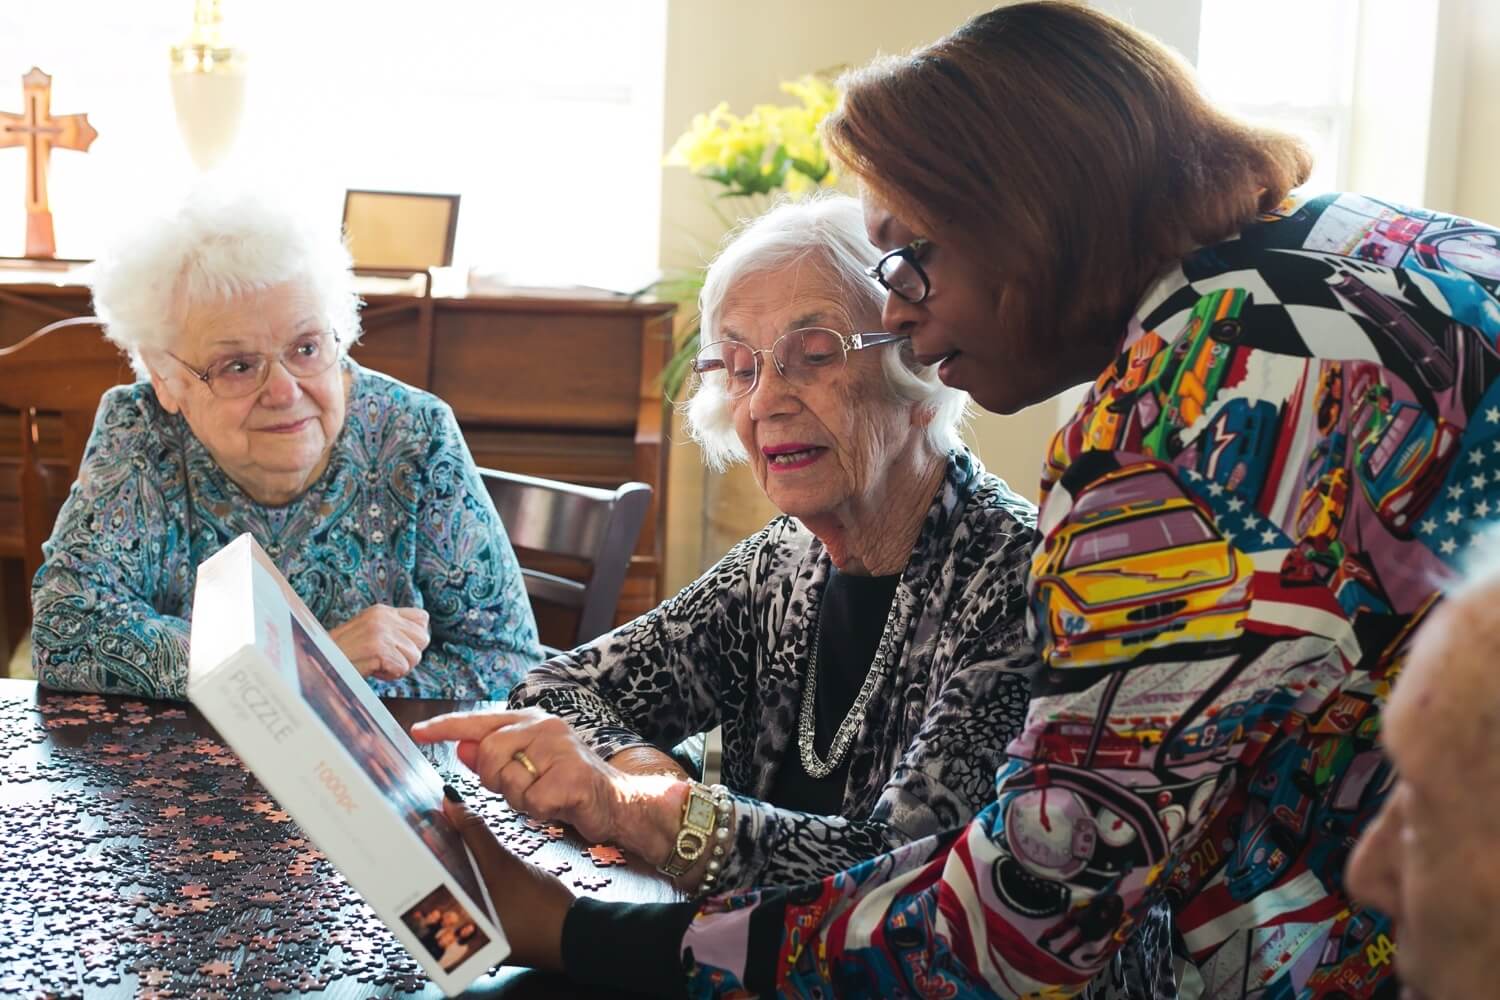 A team member helping two senior women with a jigsaw puzzle